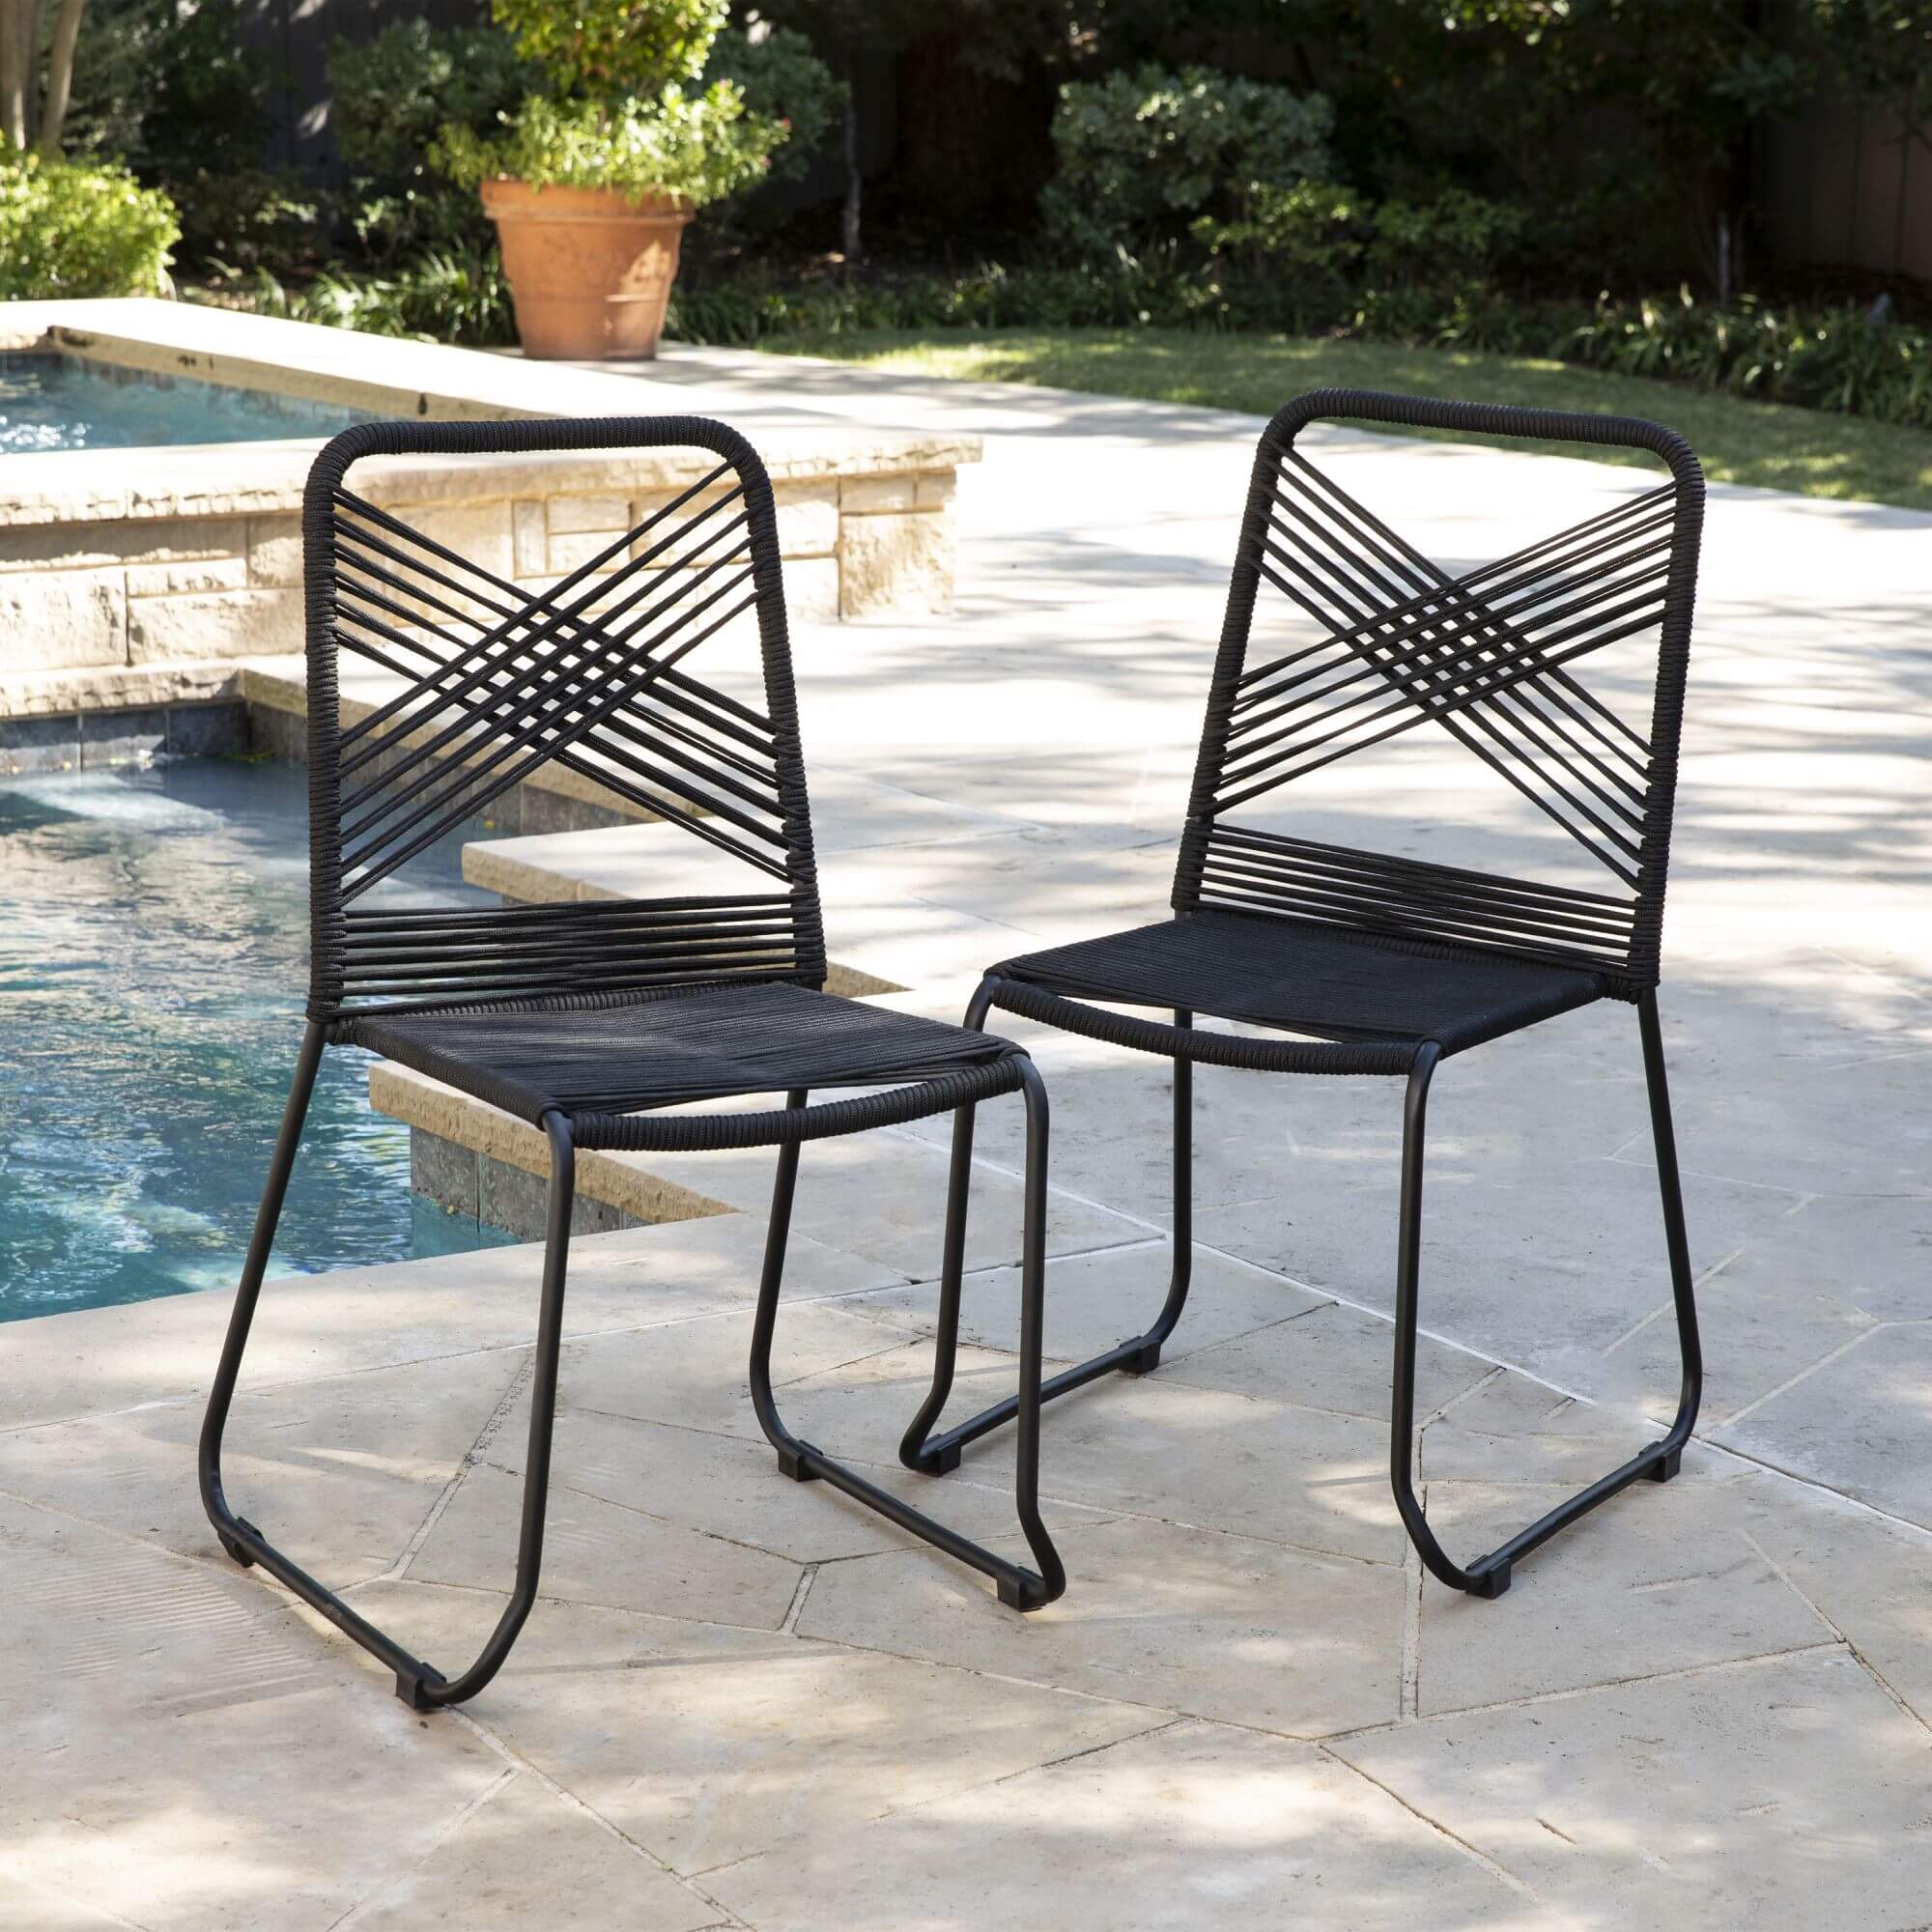 Padko Outdoor Rope Chairs – 2pc Set